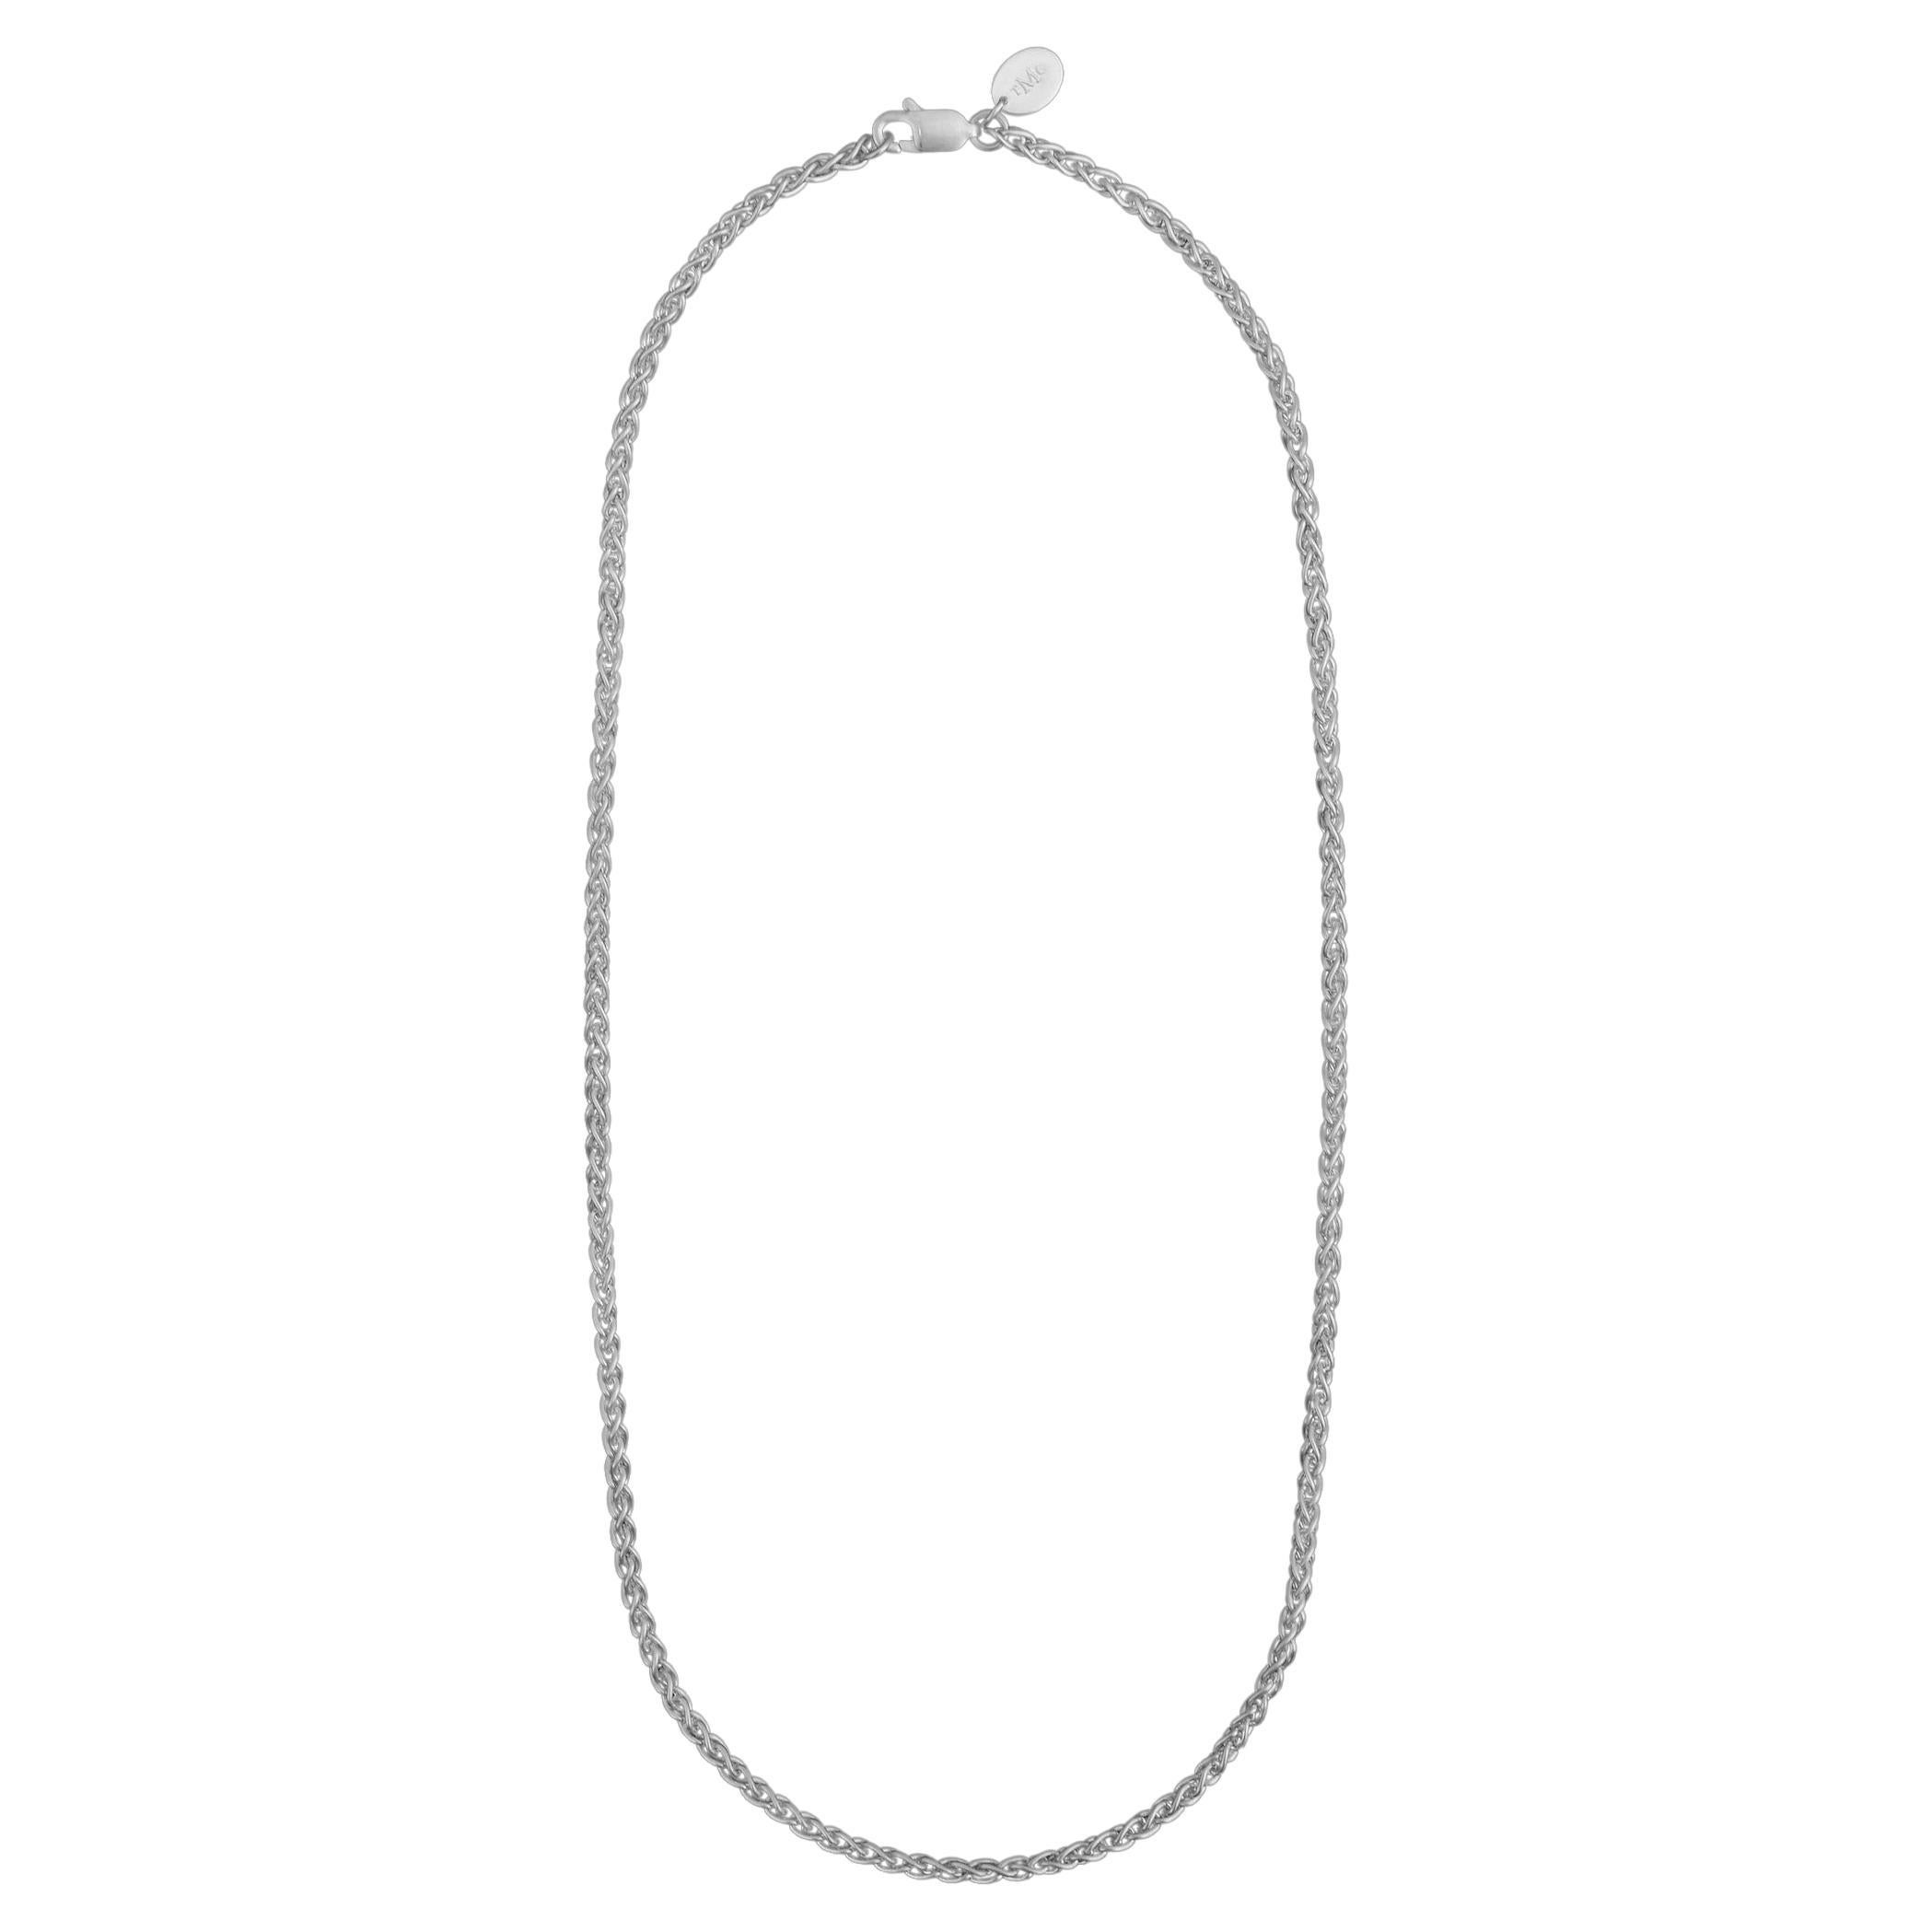 Tiana Marie Combes White Gold Woven Chain Necklace